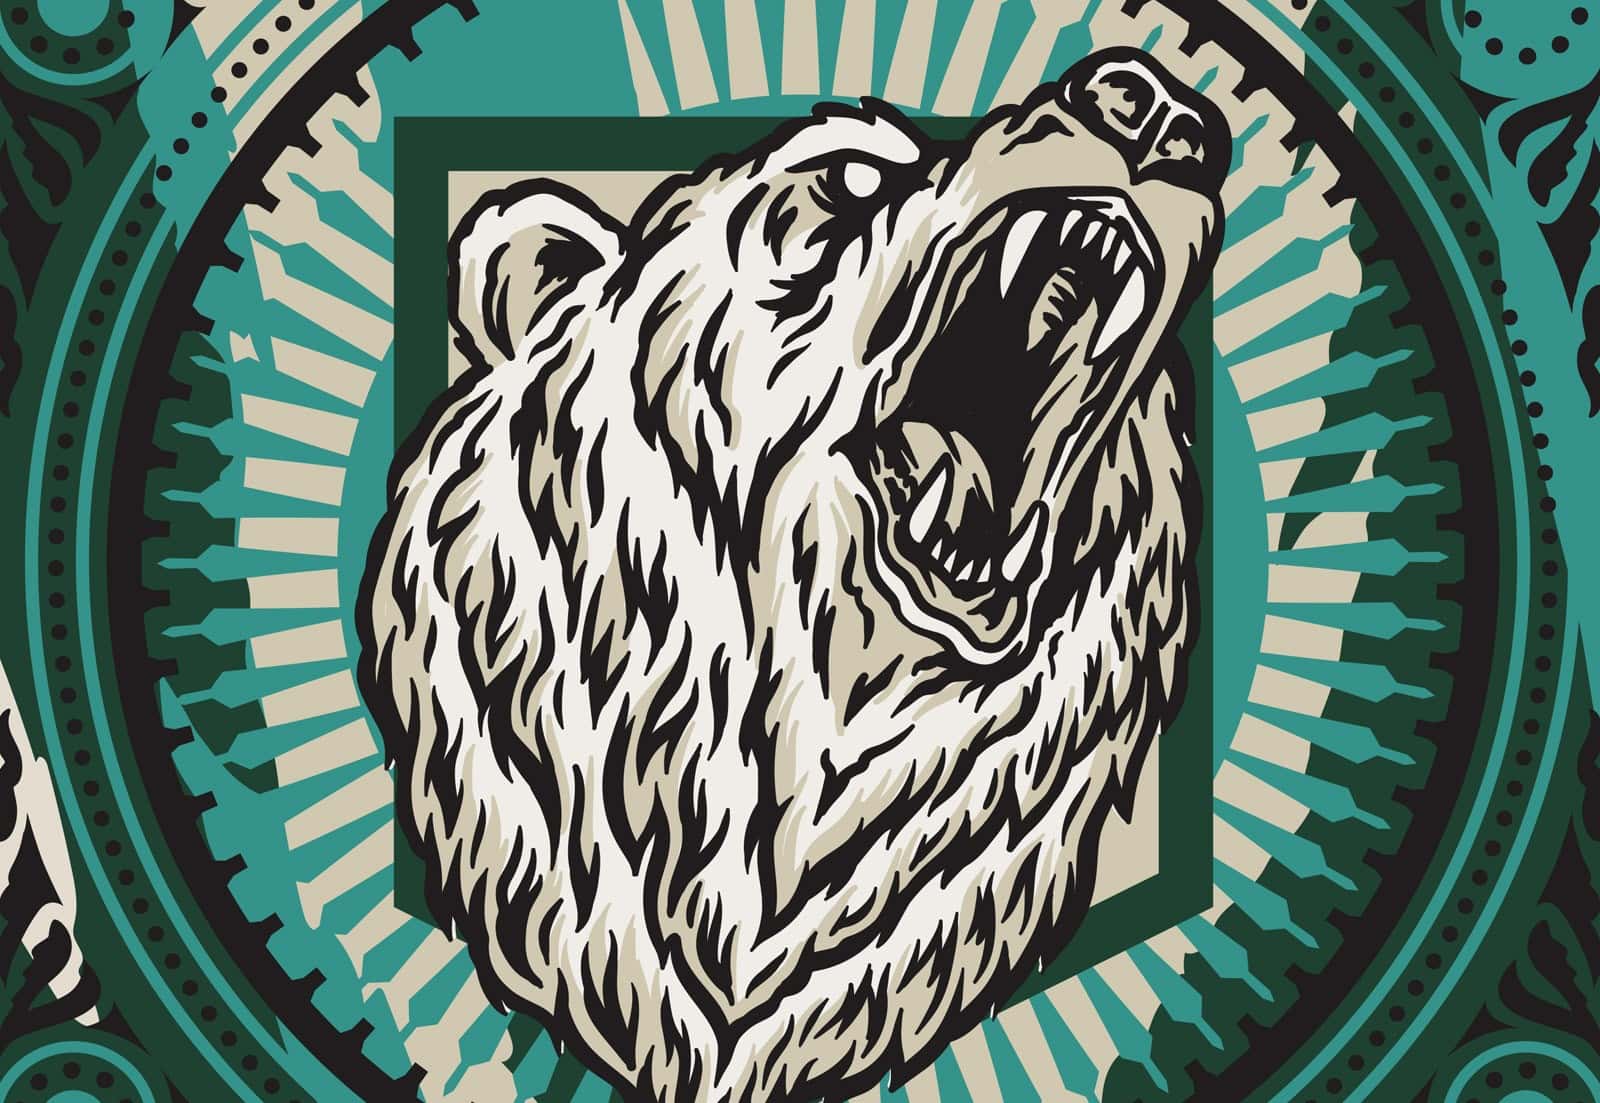 Digital concept of SPEC's grizzly bear mural